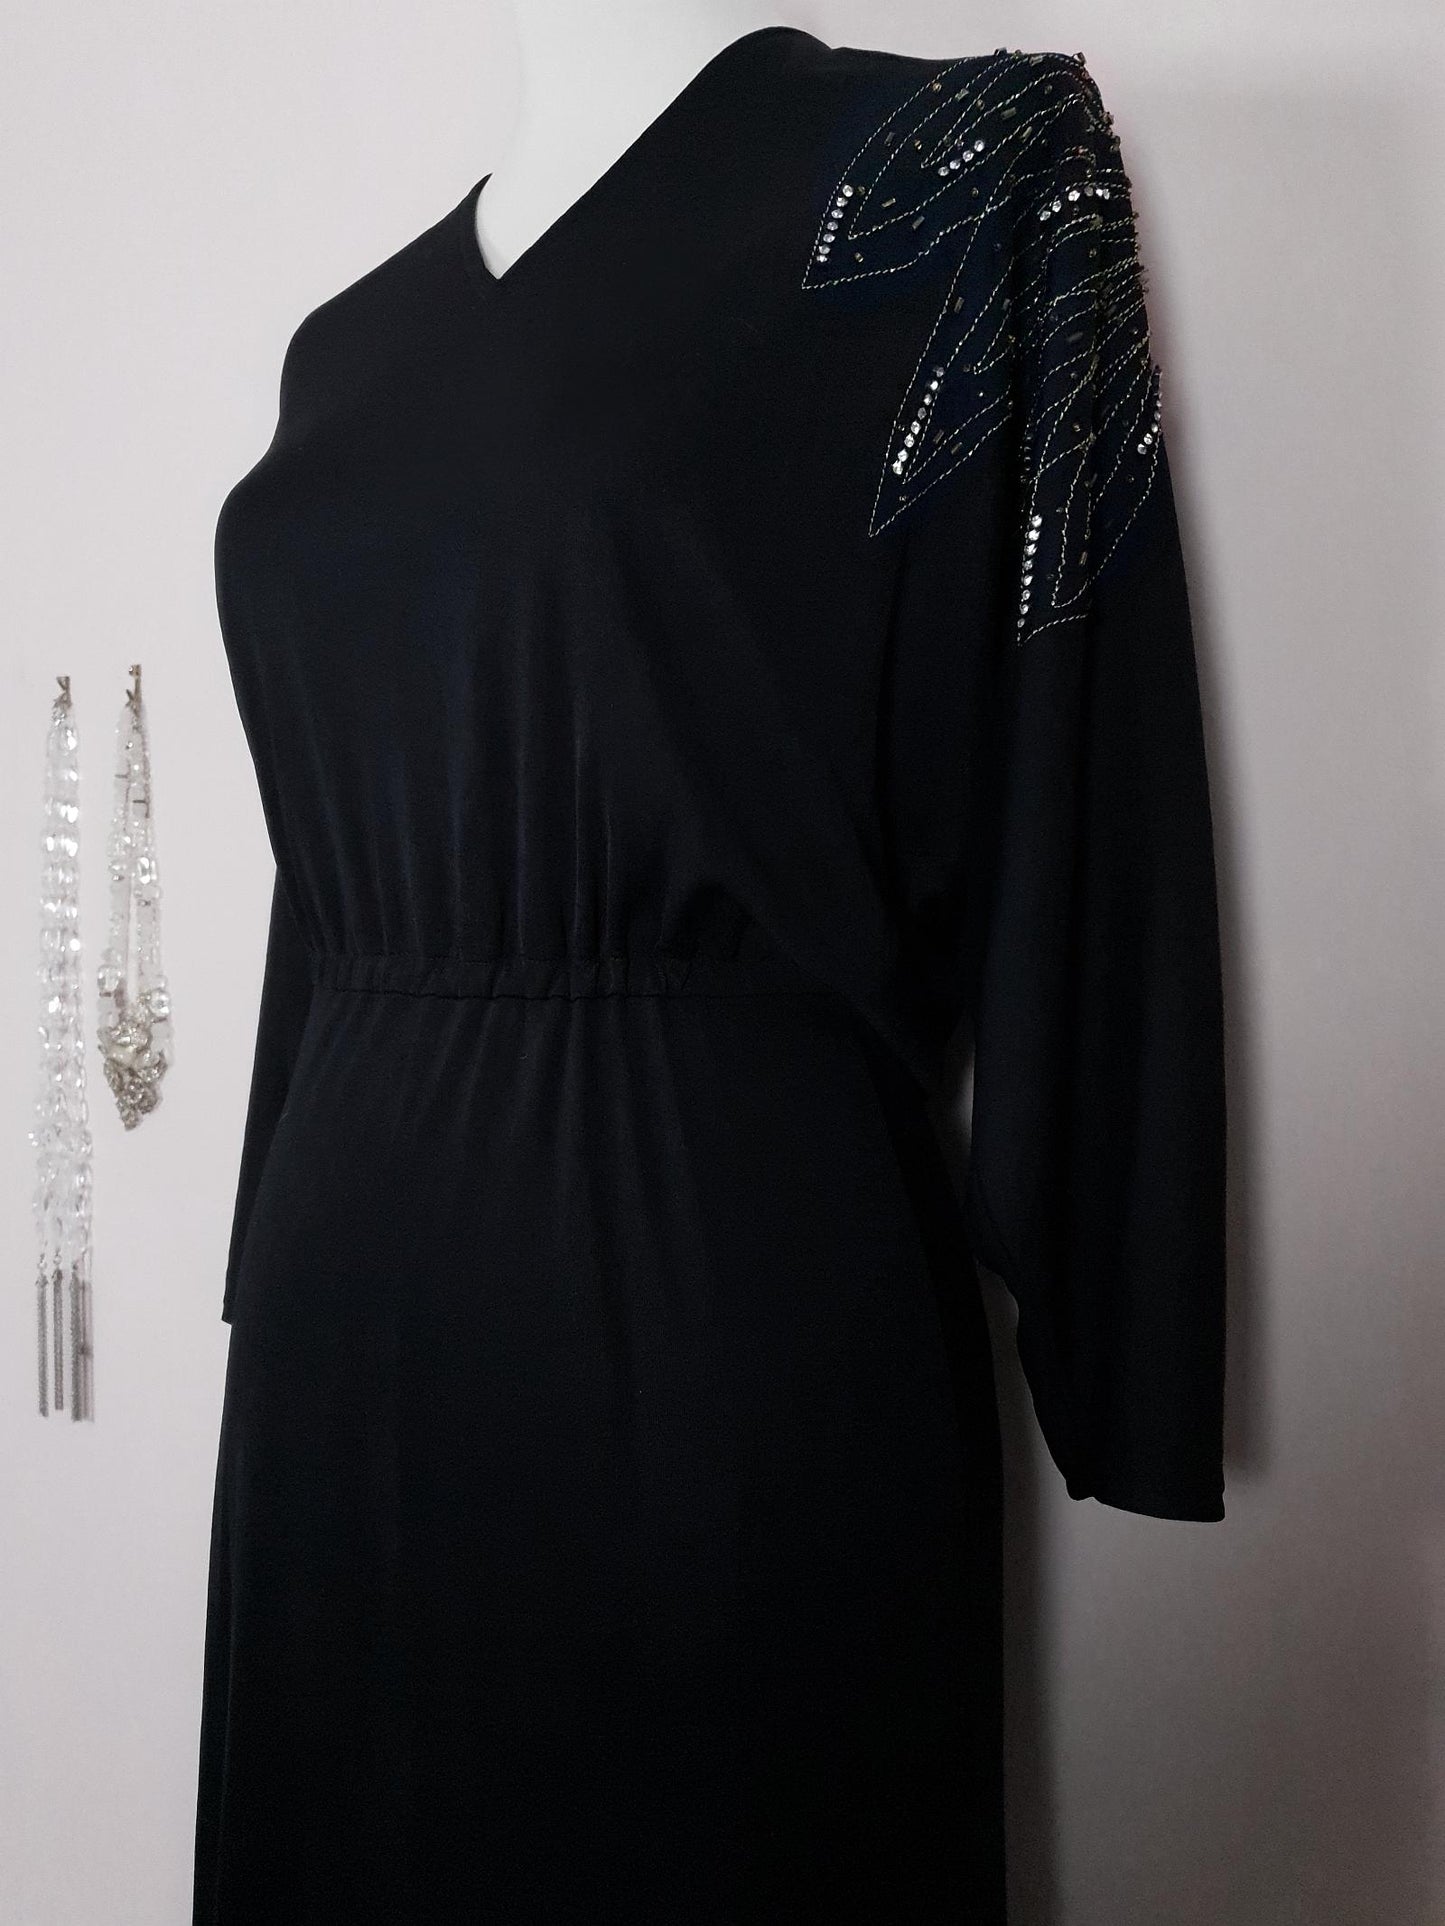 Chic Pre-Loved 1970s Bead and Sequin Black Dress - Size 8/10